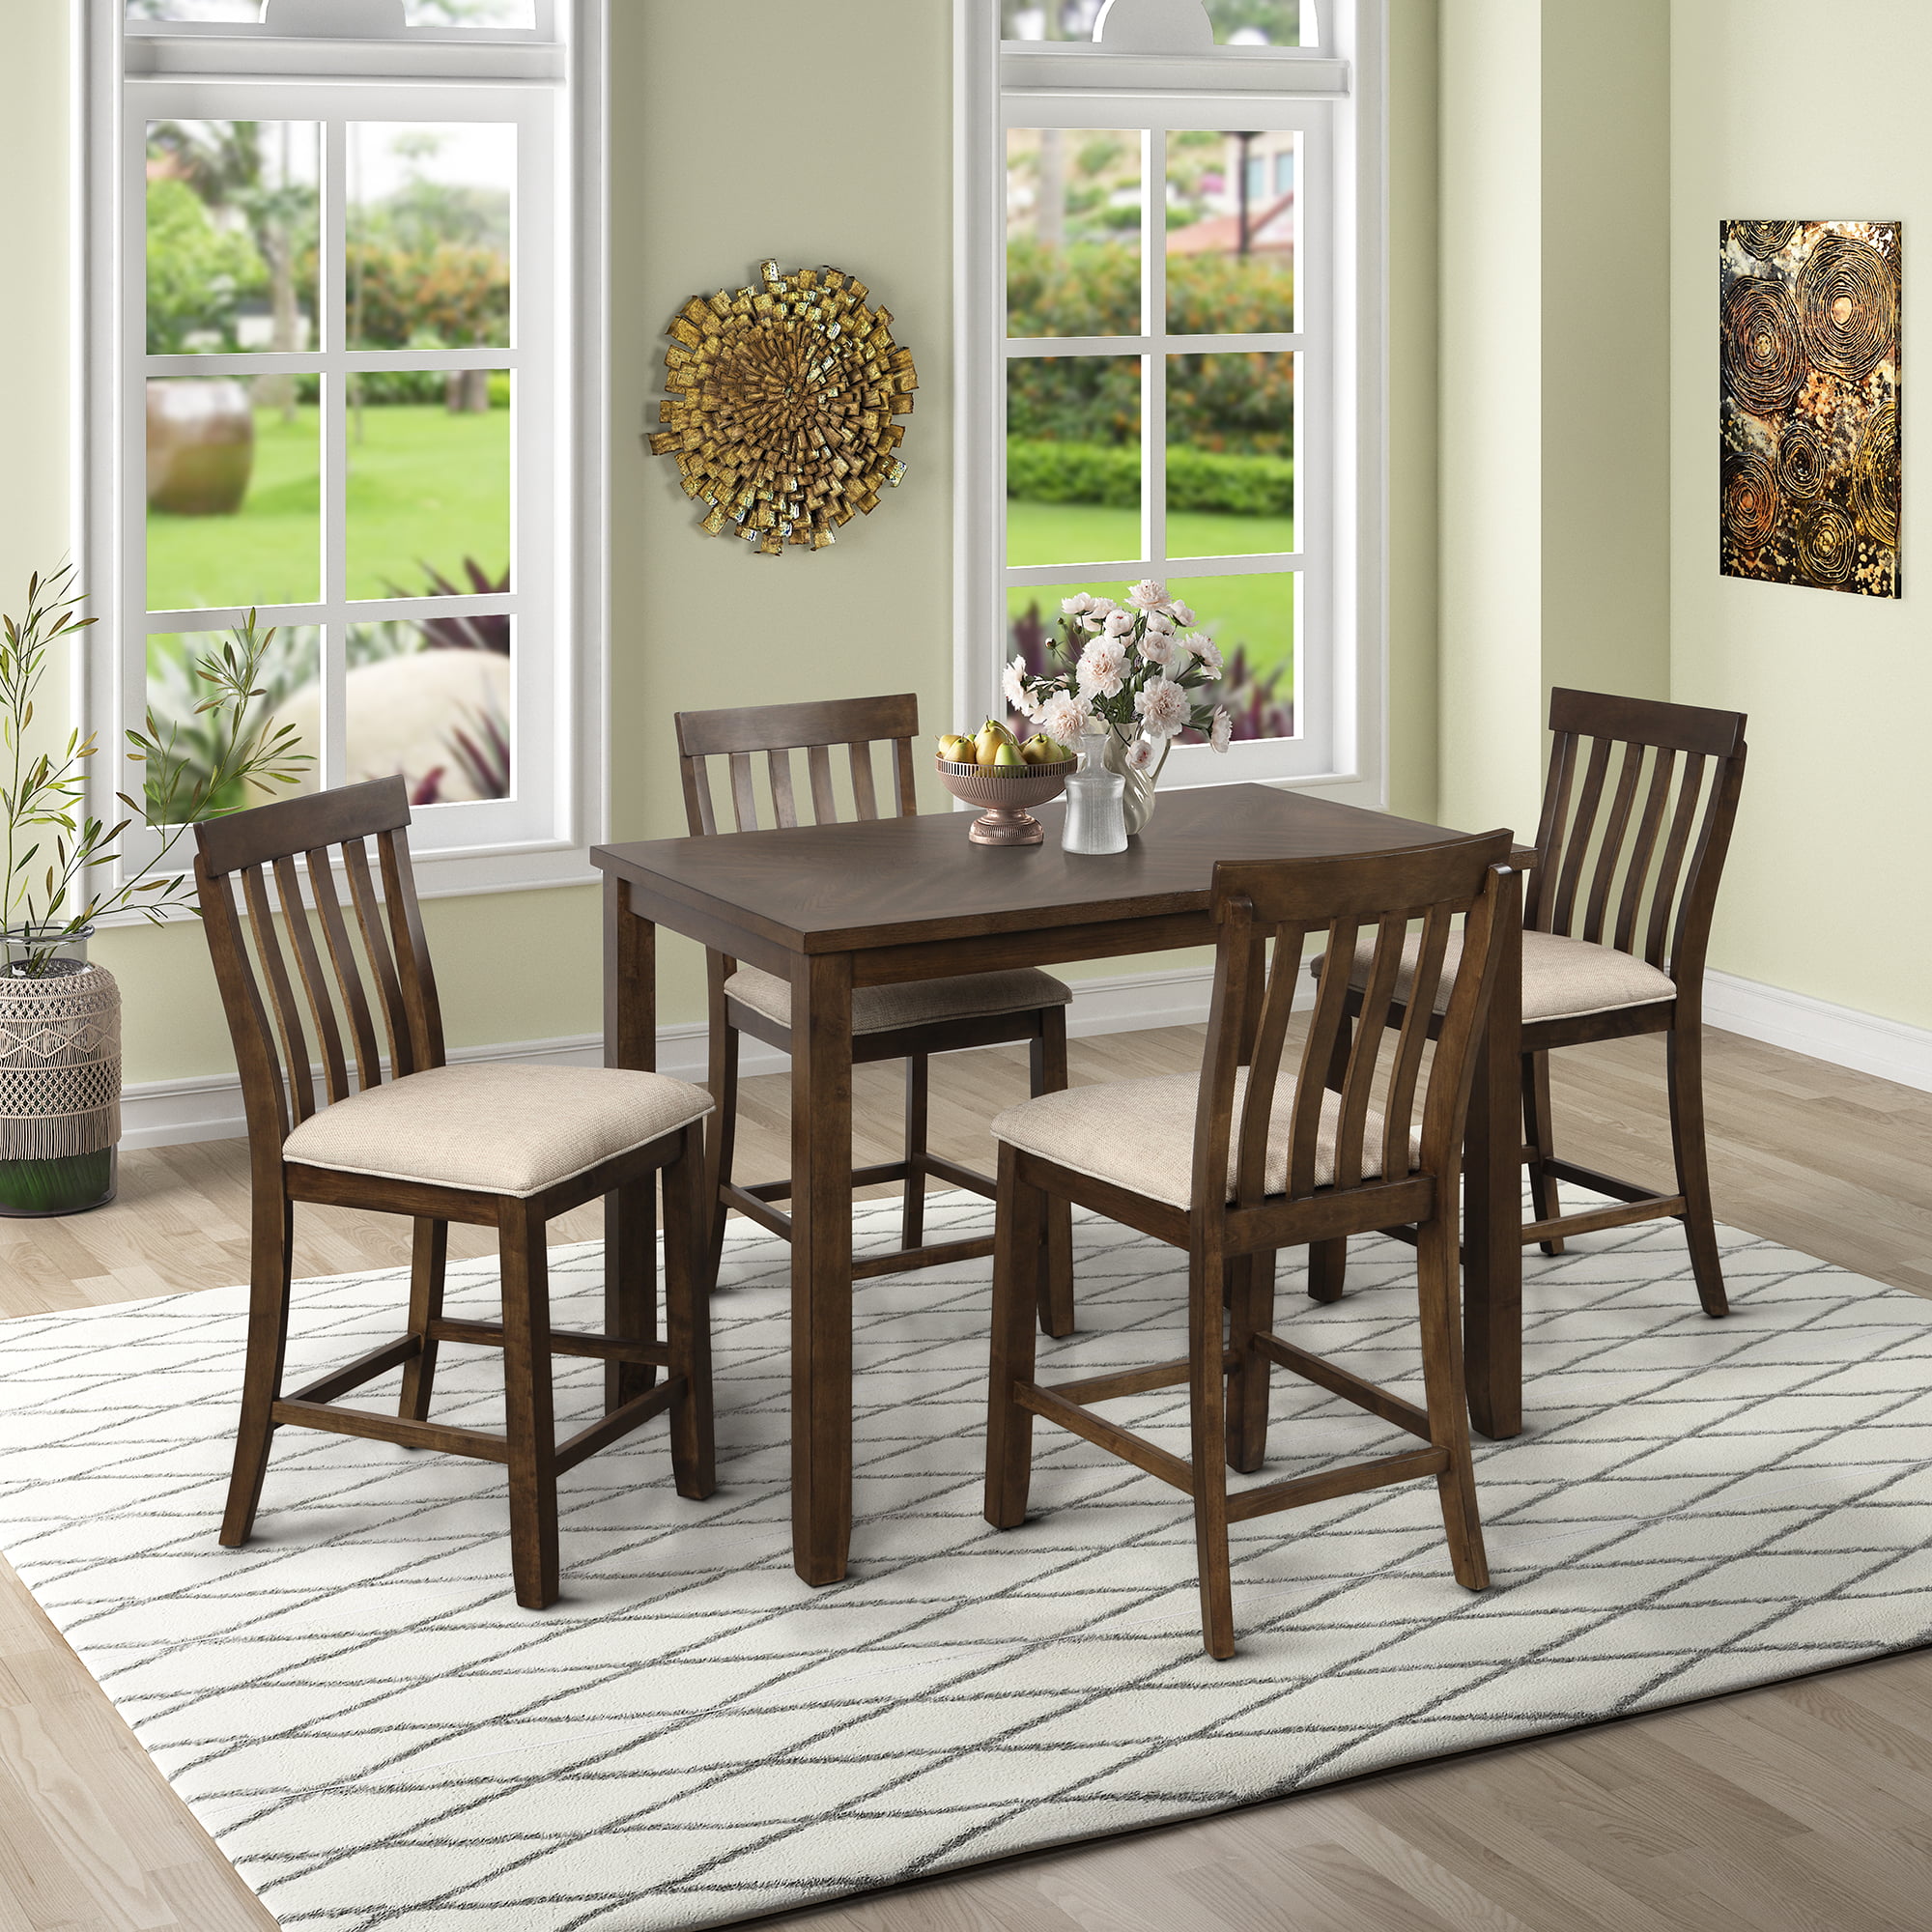 Btmway Wood Kitchen Dining Room Table, Dining Room Table And Chairs Set Of 4